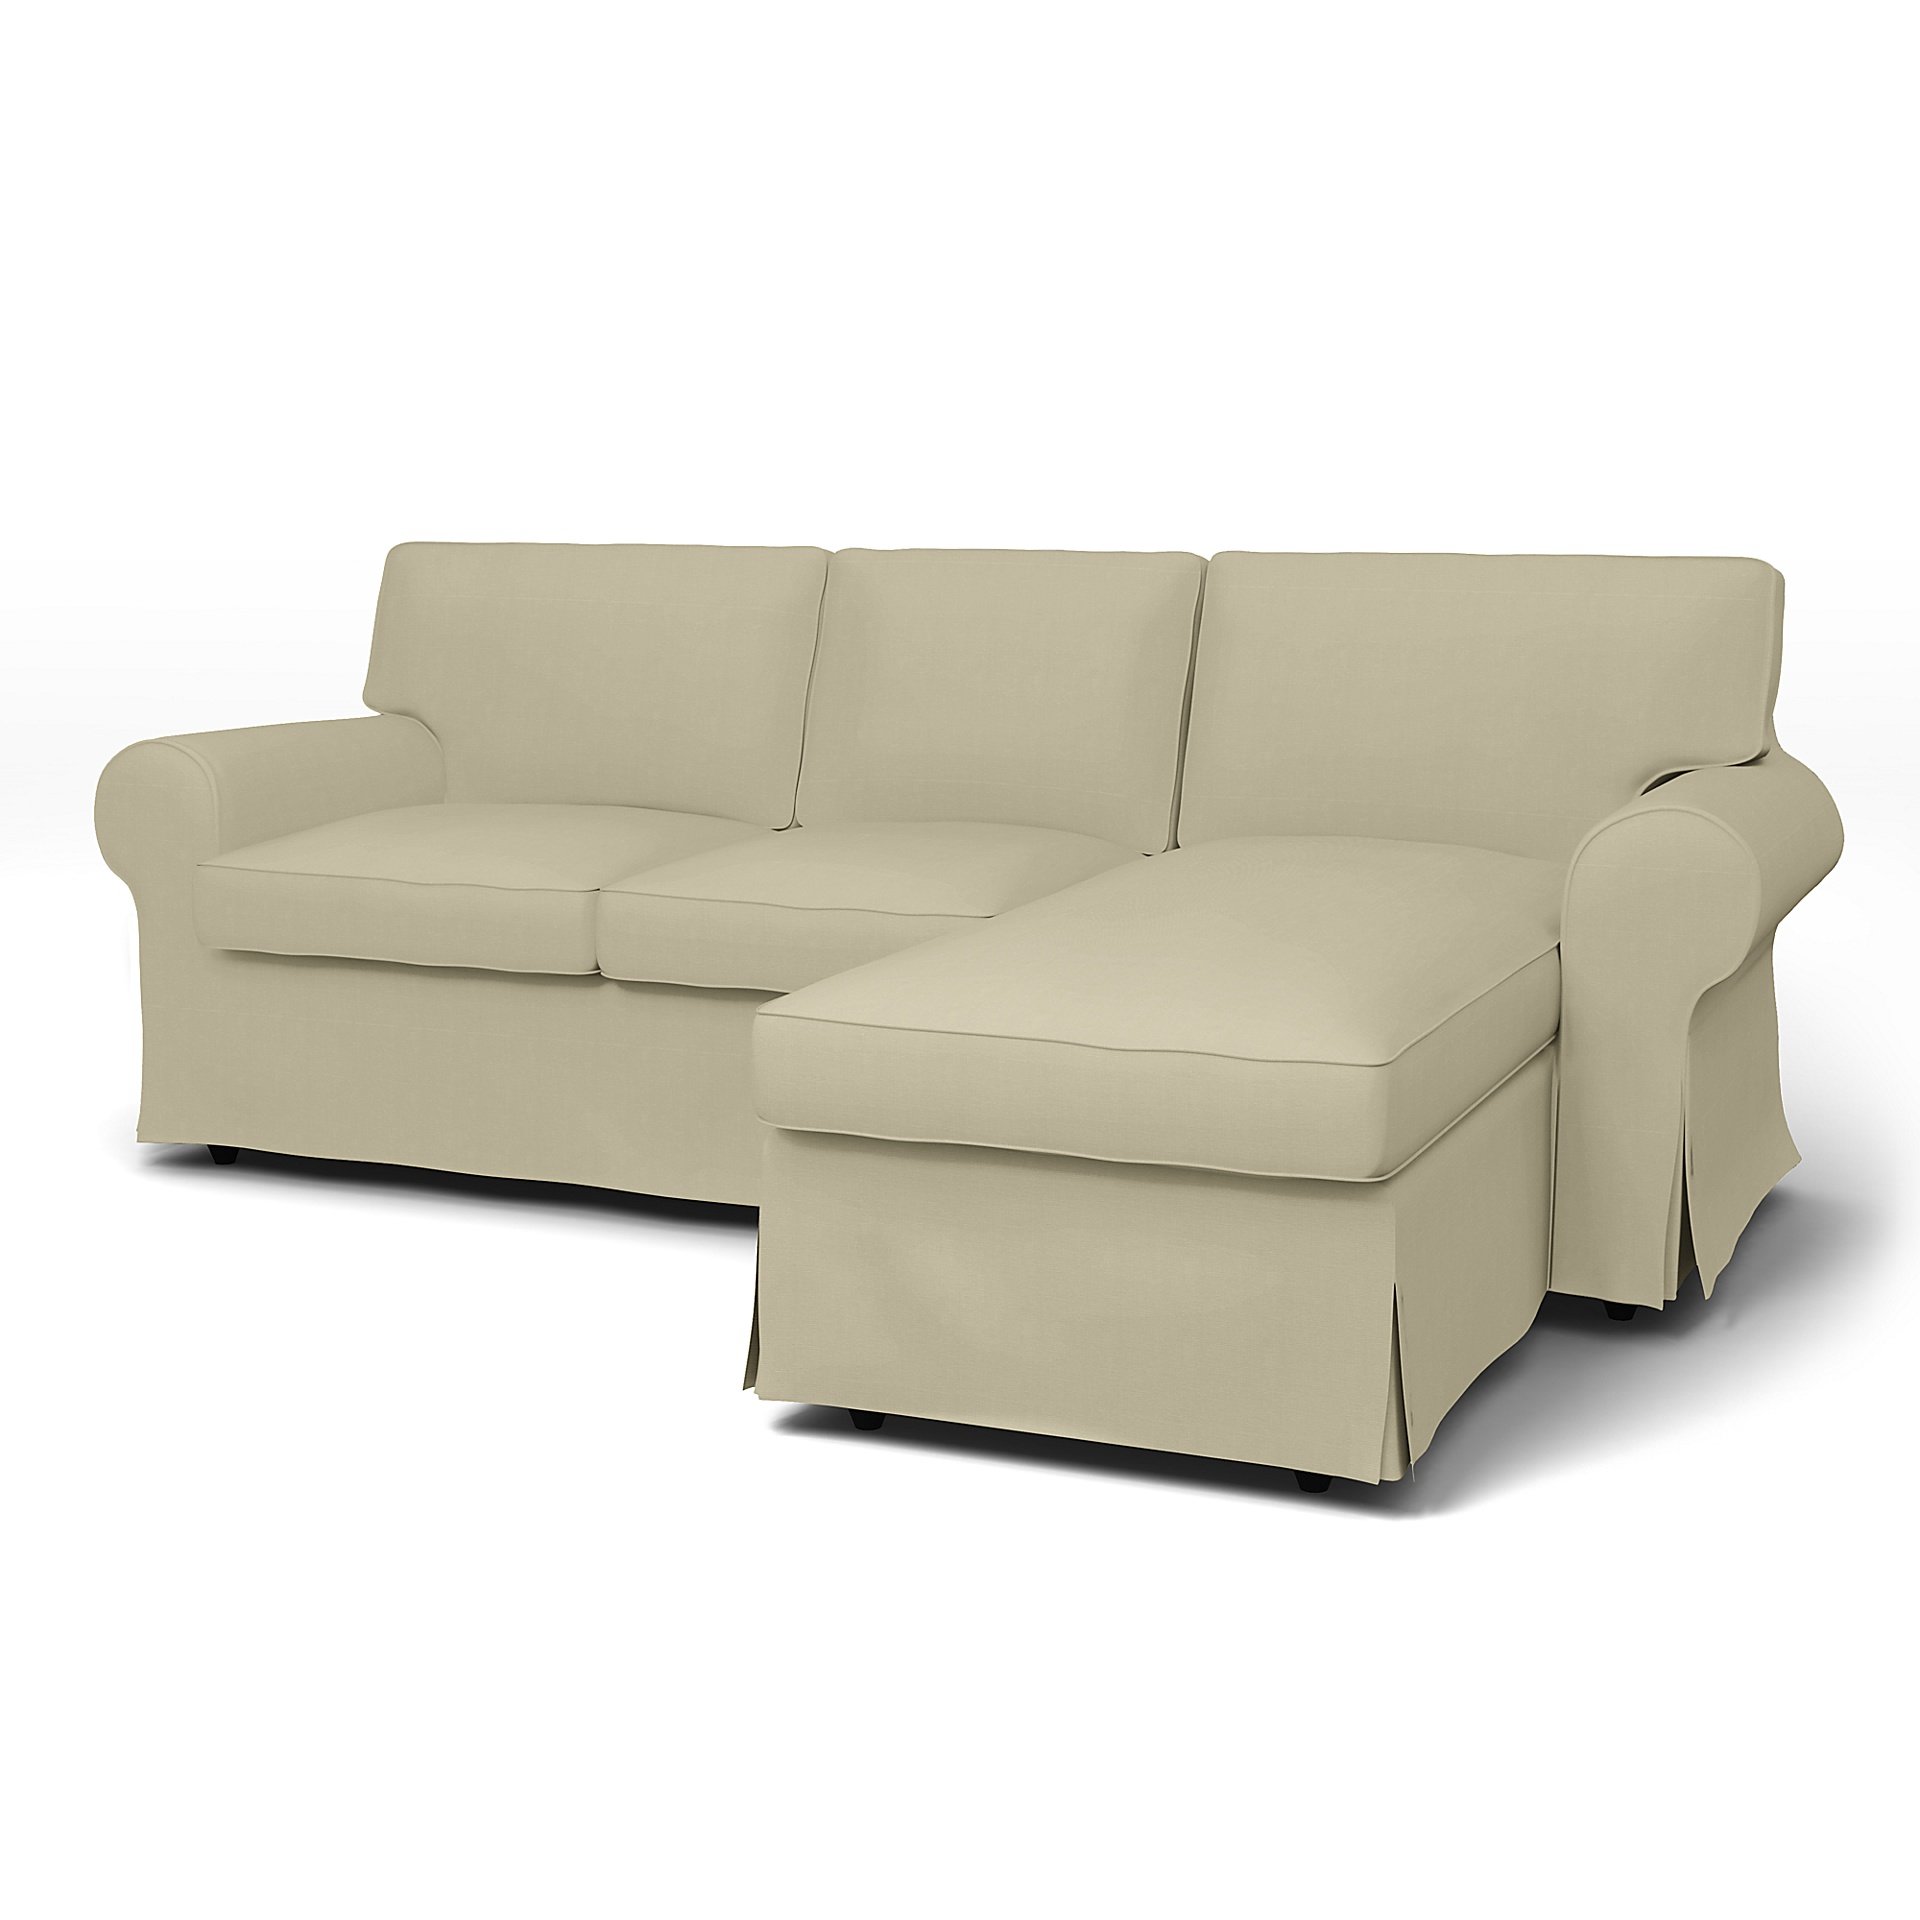 IKEA - Ektorp 3 Seater Sofa with Chaise Cover, Sand Beige, Cotton - Bemz